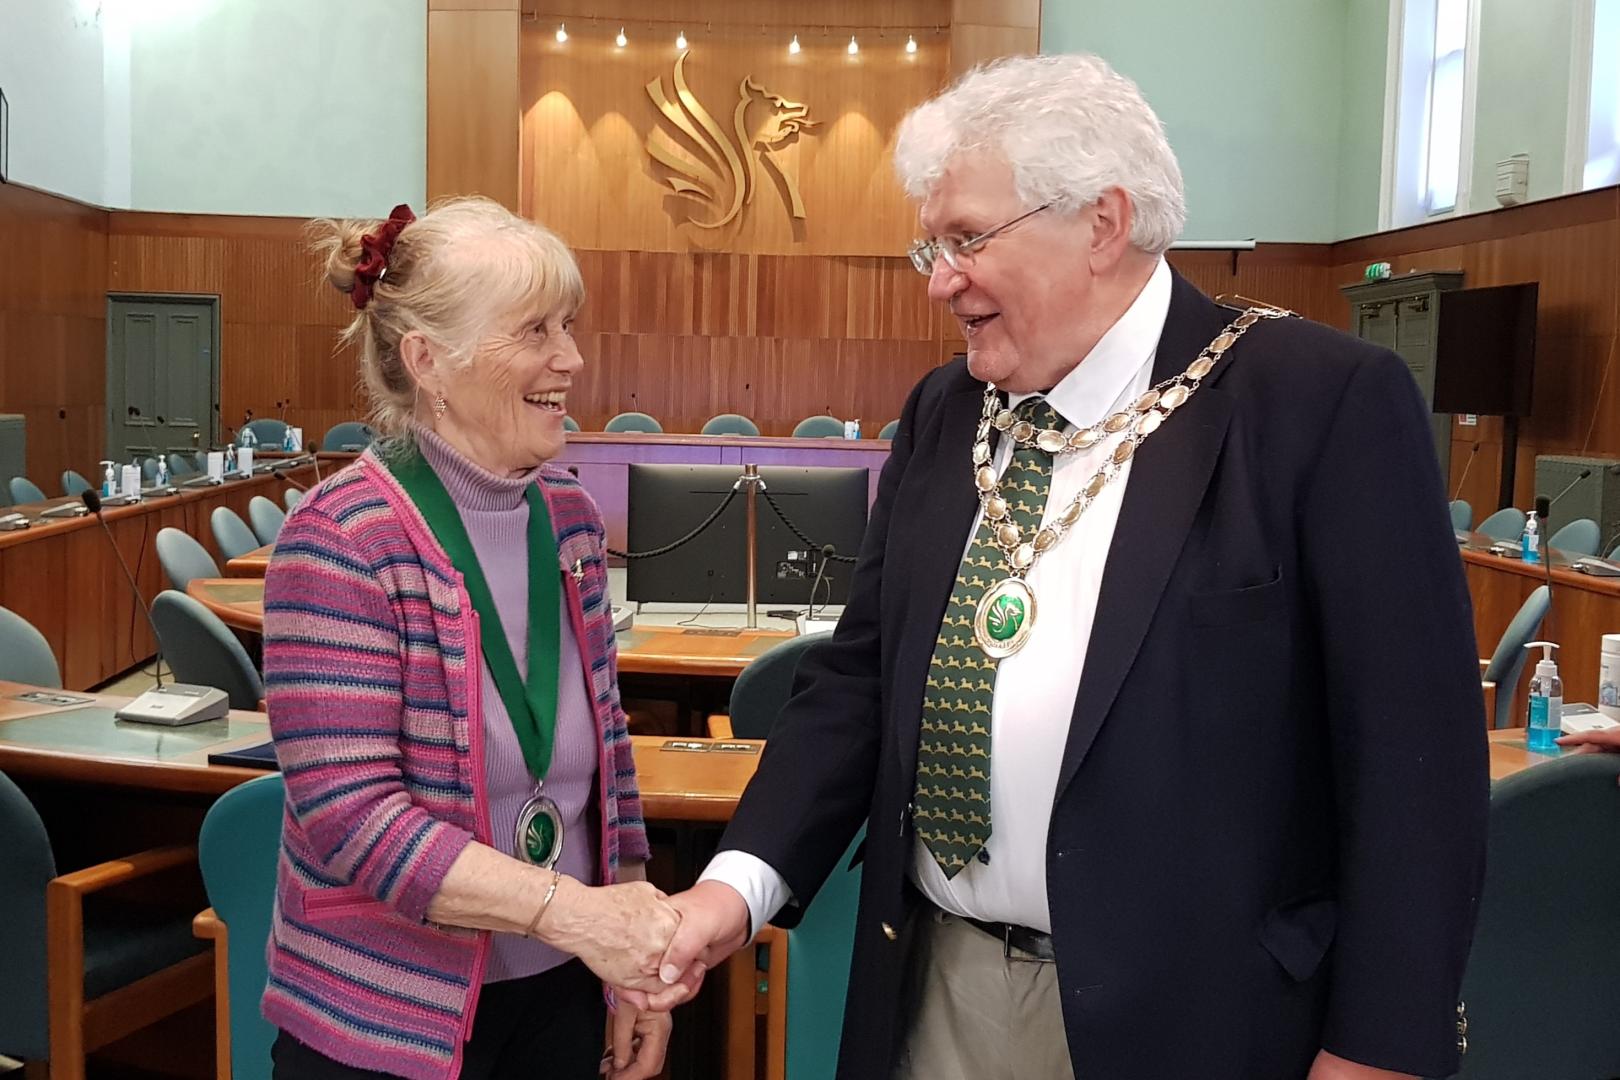 New NSC chairperson Cllr Haverson with outgoing chairman Cllr Westwood